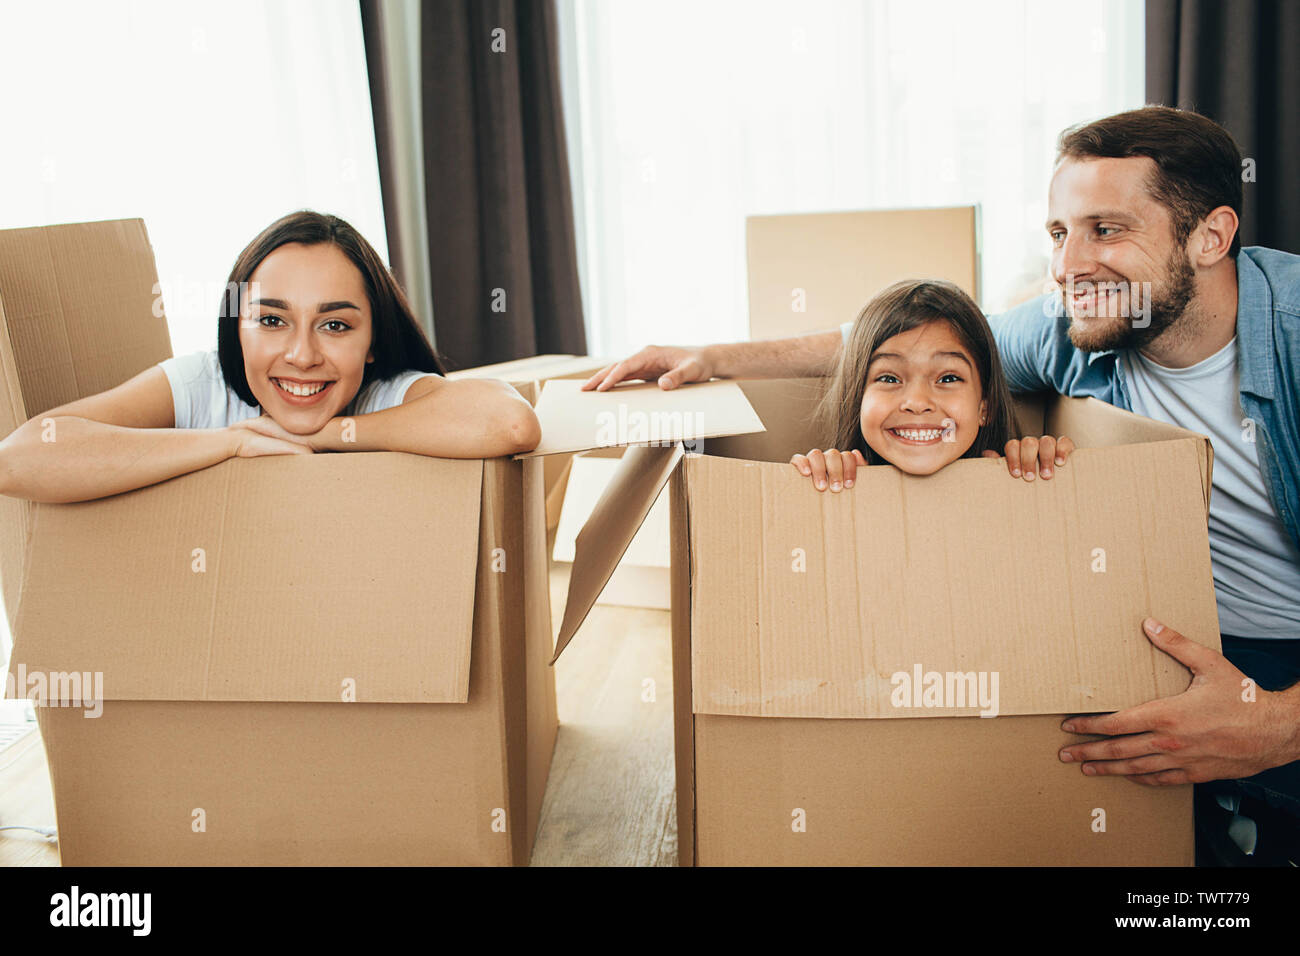 Happy family having fun with Cardboard boxes while moving into new apartment. Mother, father and daughter together smiling, happy young family Stock Photo